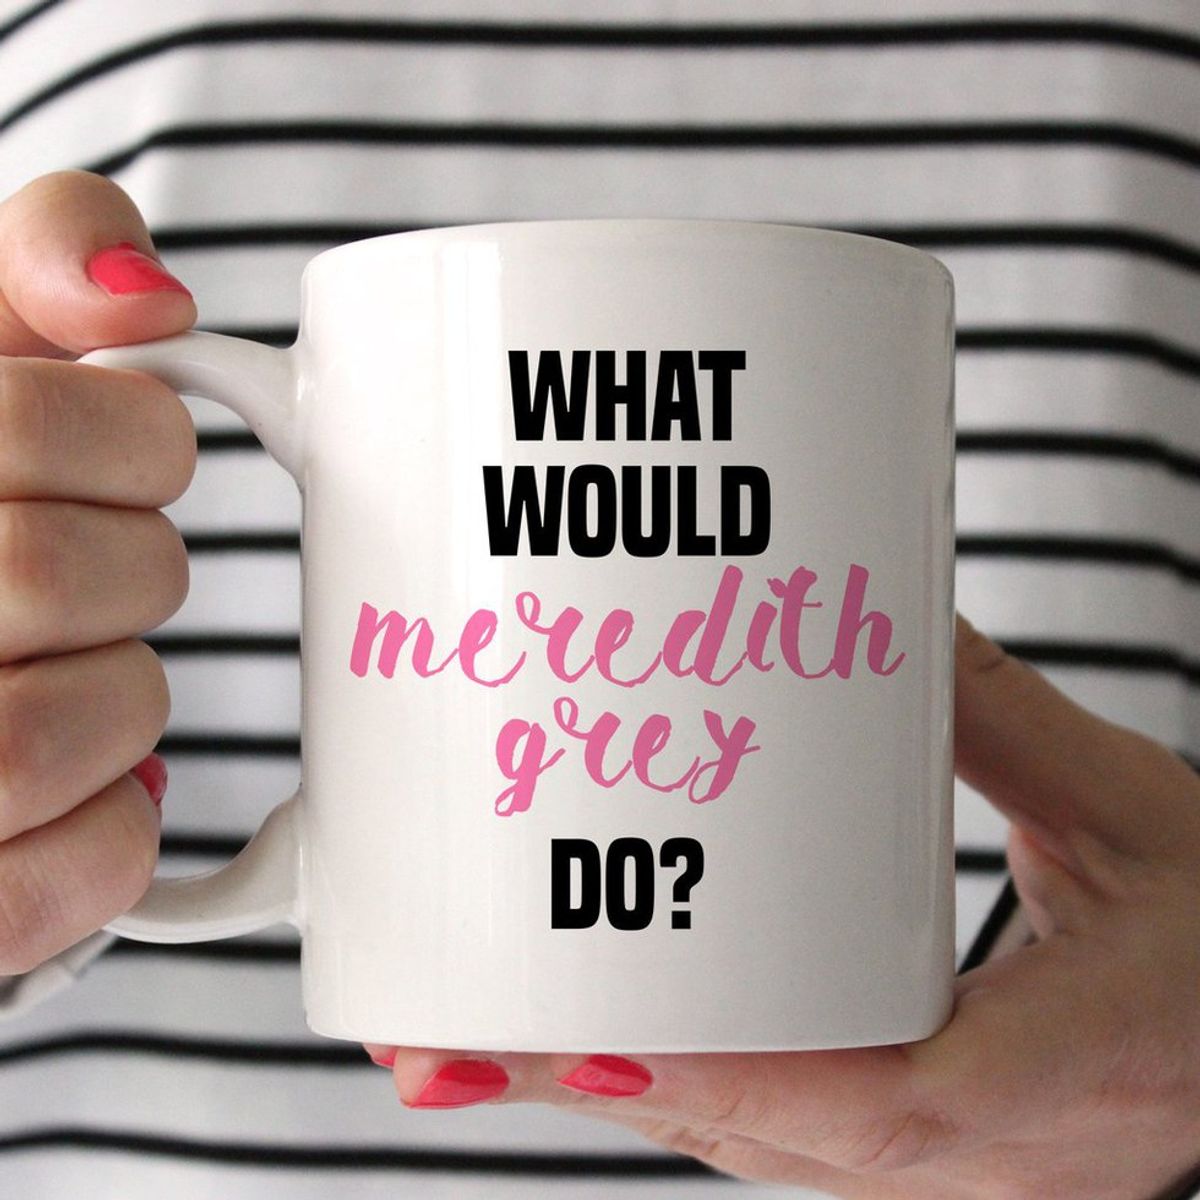 7 Life Lessons That Meredith Grey Taught Us